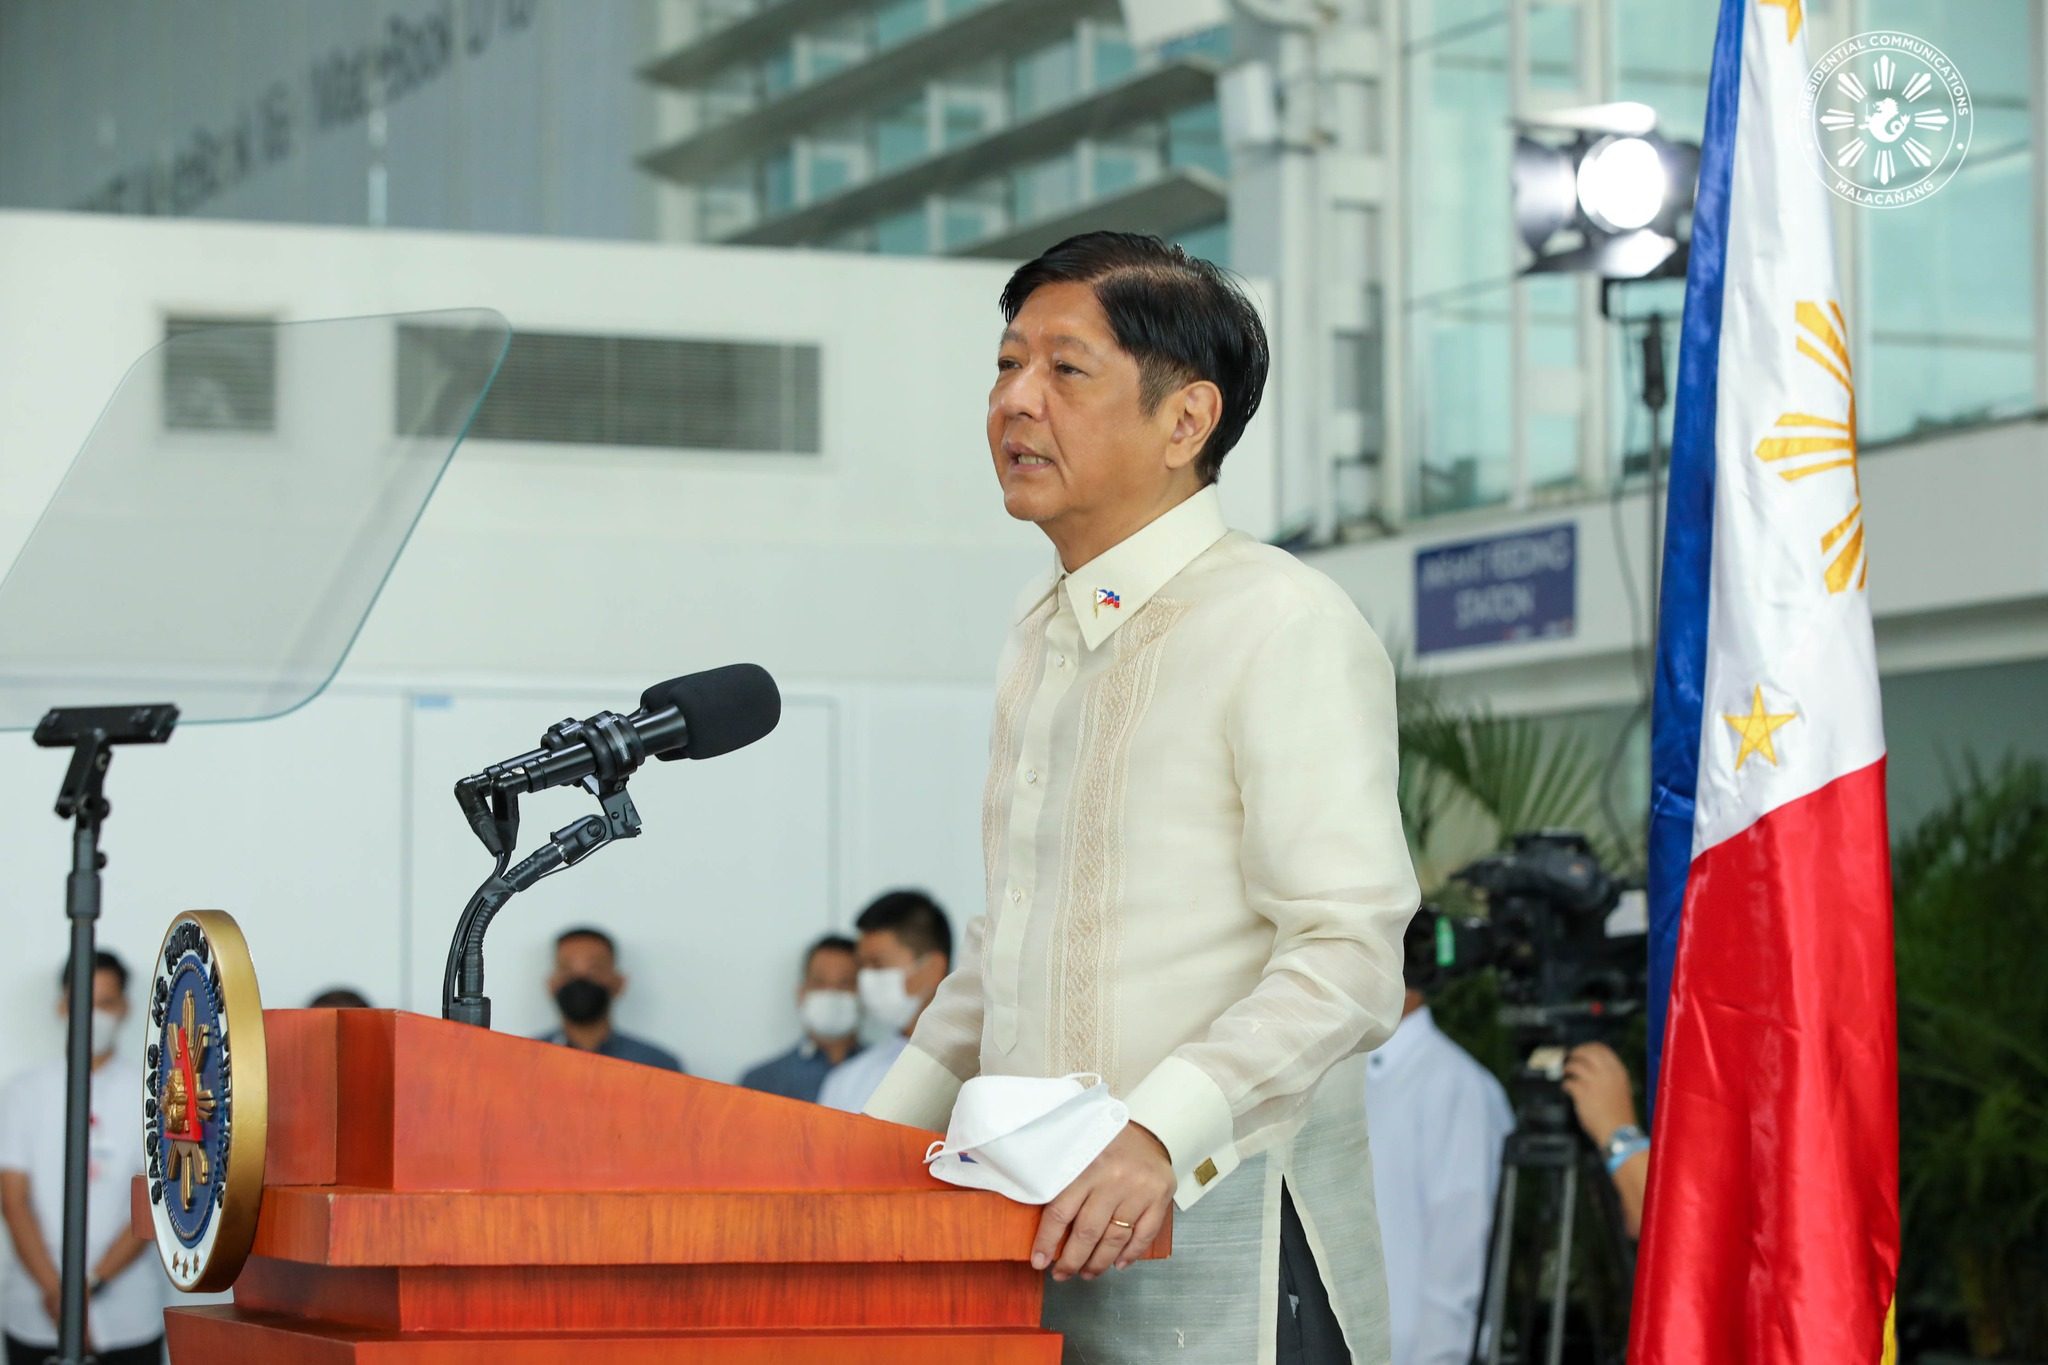 Everything you need to know about Marcos’ visit to New York